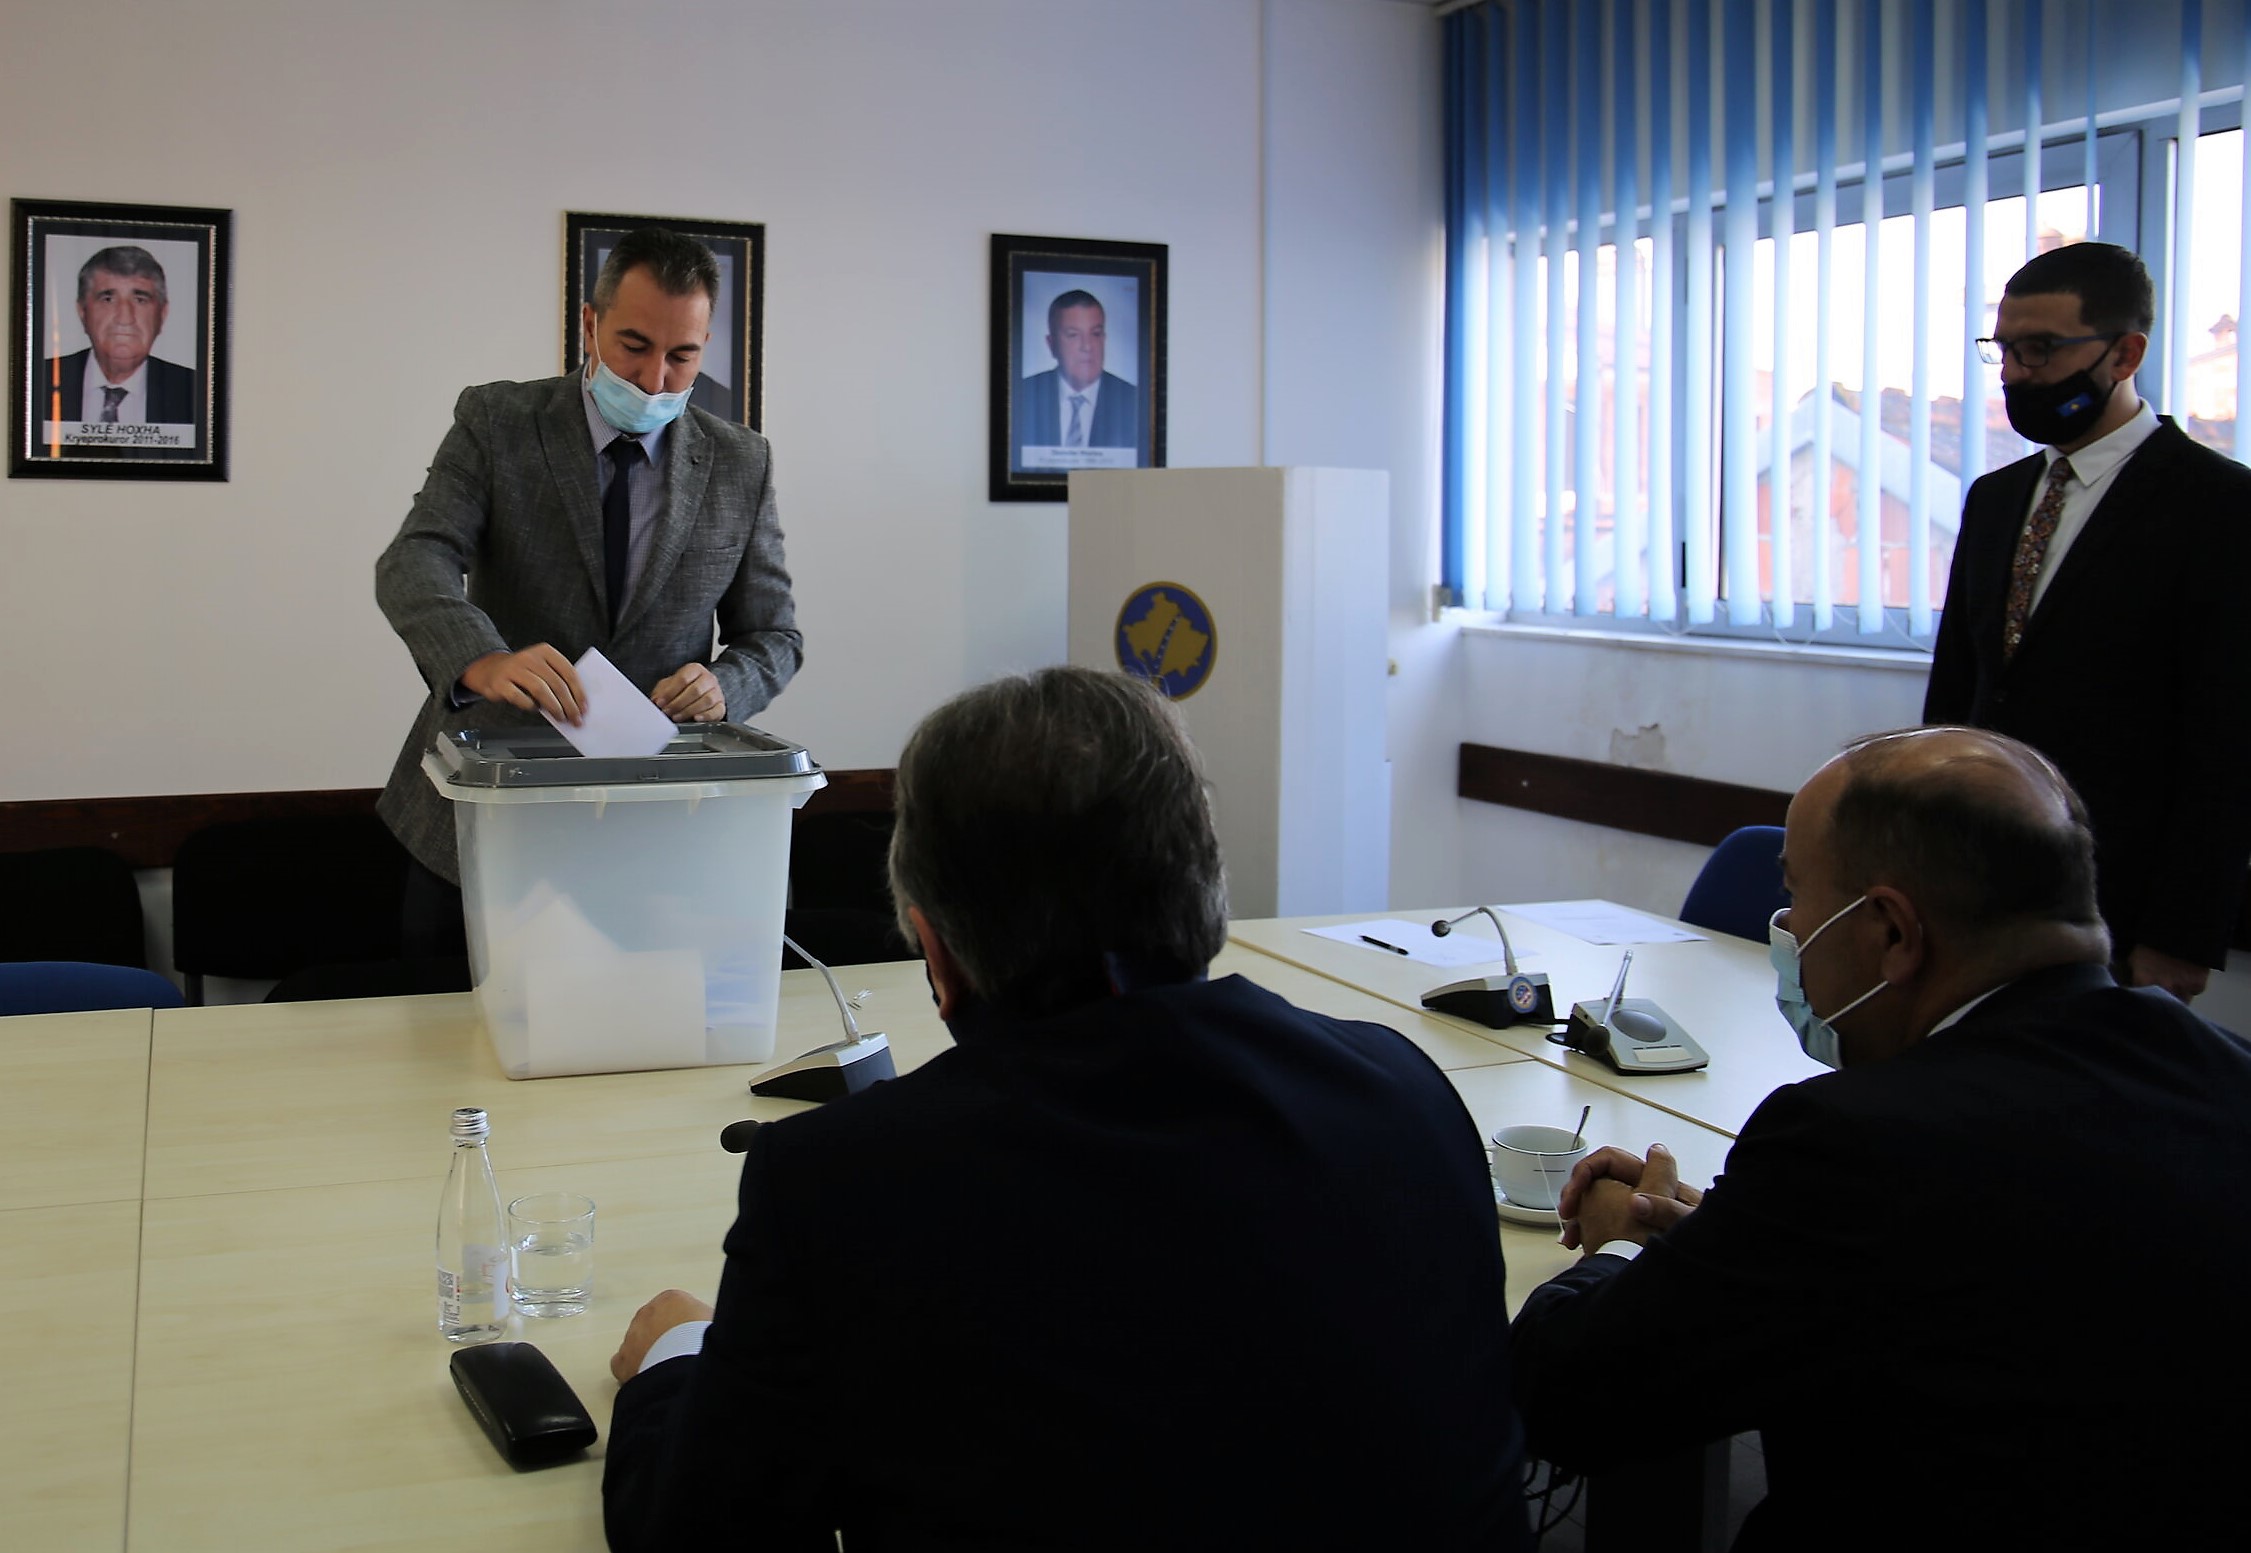 Voting process for the election of KPC members from the ranks of the Basic Prosecution of Prizren and Gjakova takes place